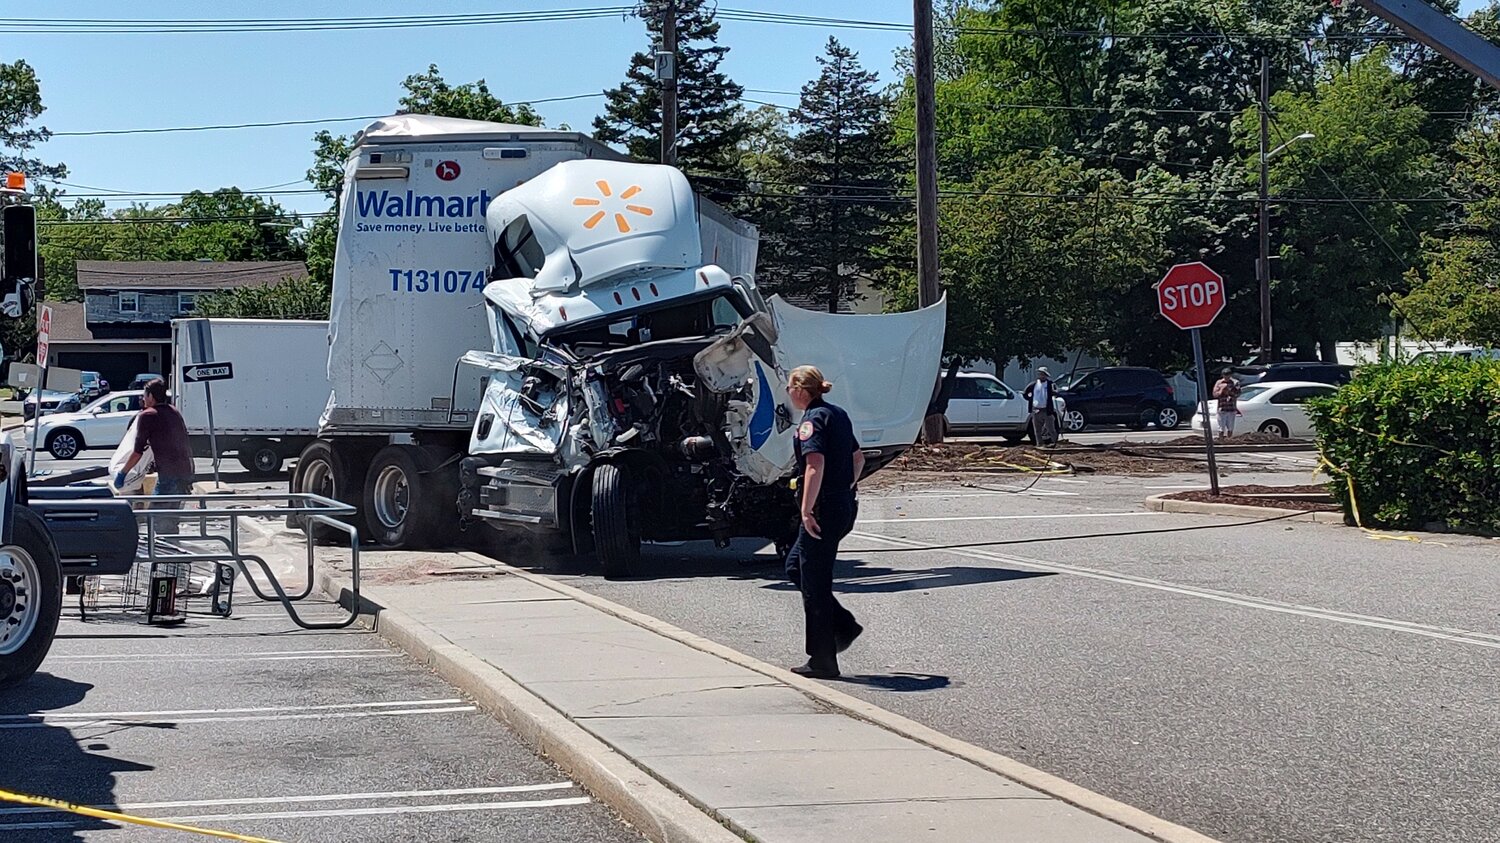 A multi-vehicle crash, which began in East Meadow and ended in Bellmore, caused several injuries and led to one arrest. A tractor-trailer overturned in the parking lot of the North Bellmore Stop & Shop, after striking several cars, police say.